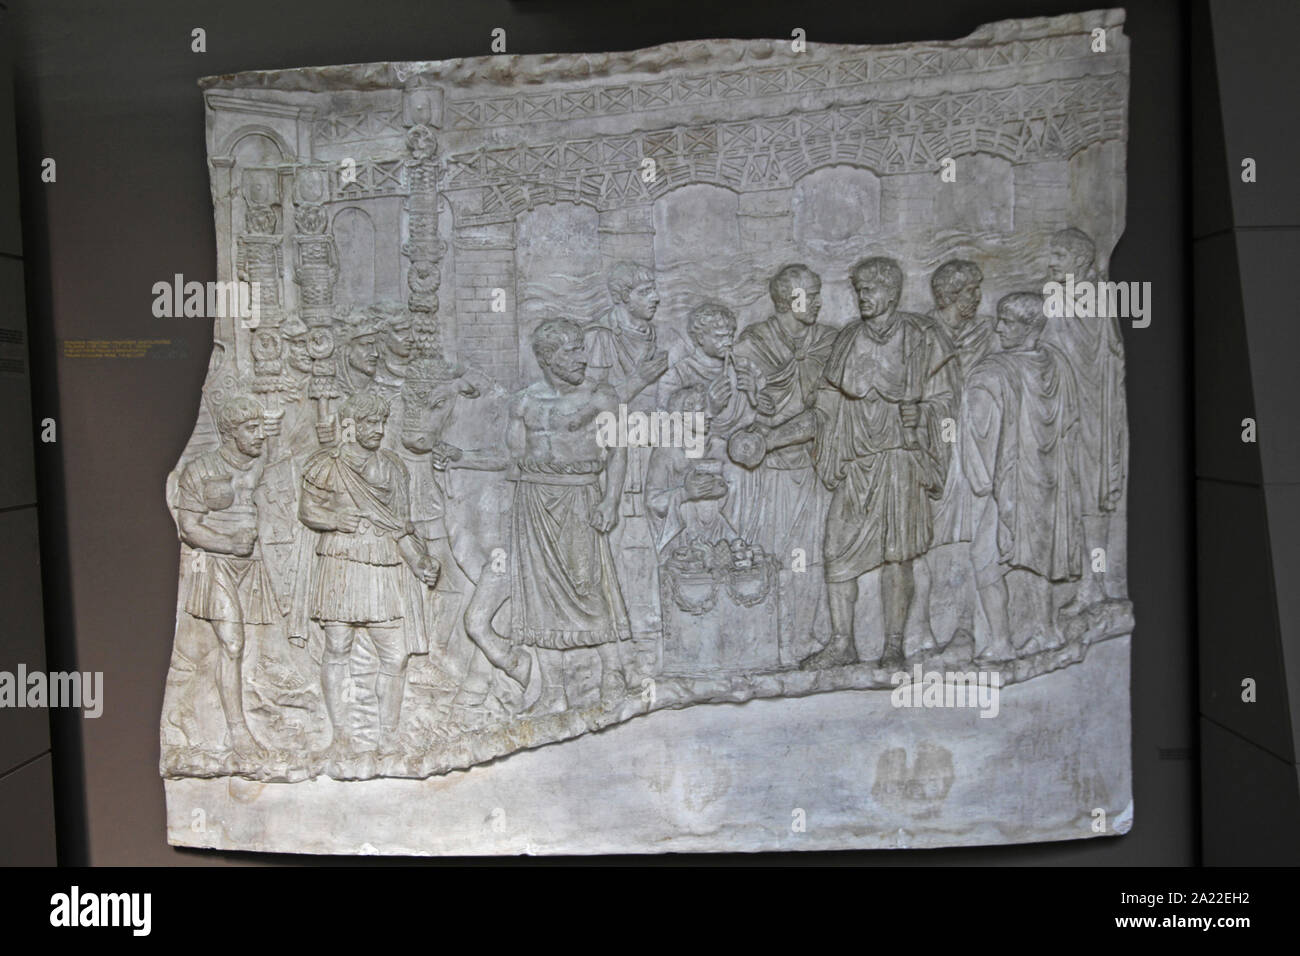 The Copy of the Relief from the Trajan’s Column in Rome, National Archaeological Museum Djerdap, Kladovo, Serbia. Stock Photo